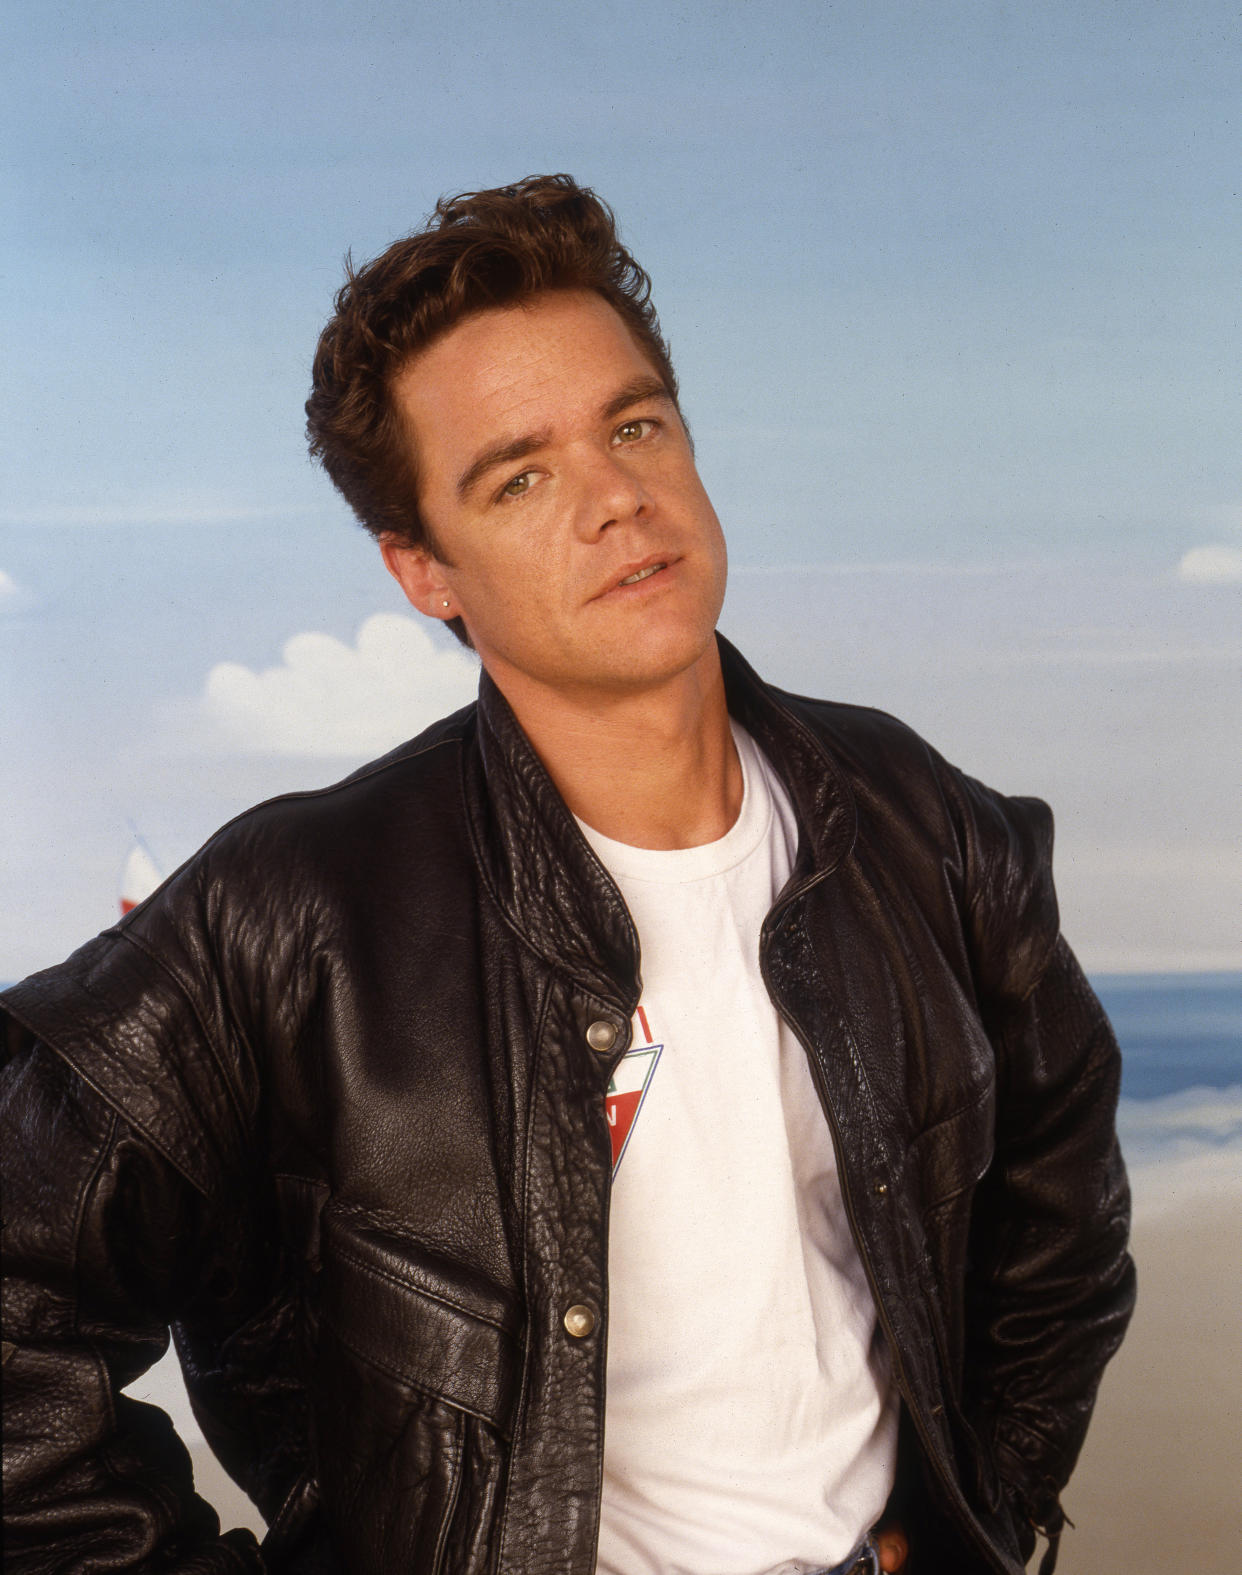 Studio portrait of actor and singer Stefan Dennis, then playing the character of Paul Robinson in Australian TV soap opera 'Neighbours', United Kingdom, circa 1988. (Photo by Tim Roney/Getty Images)